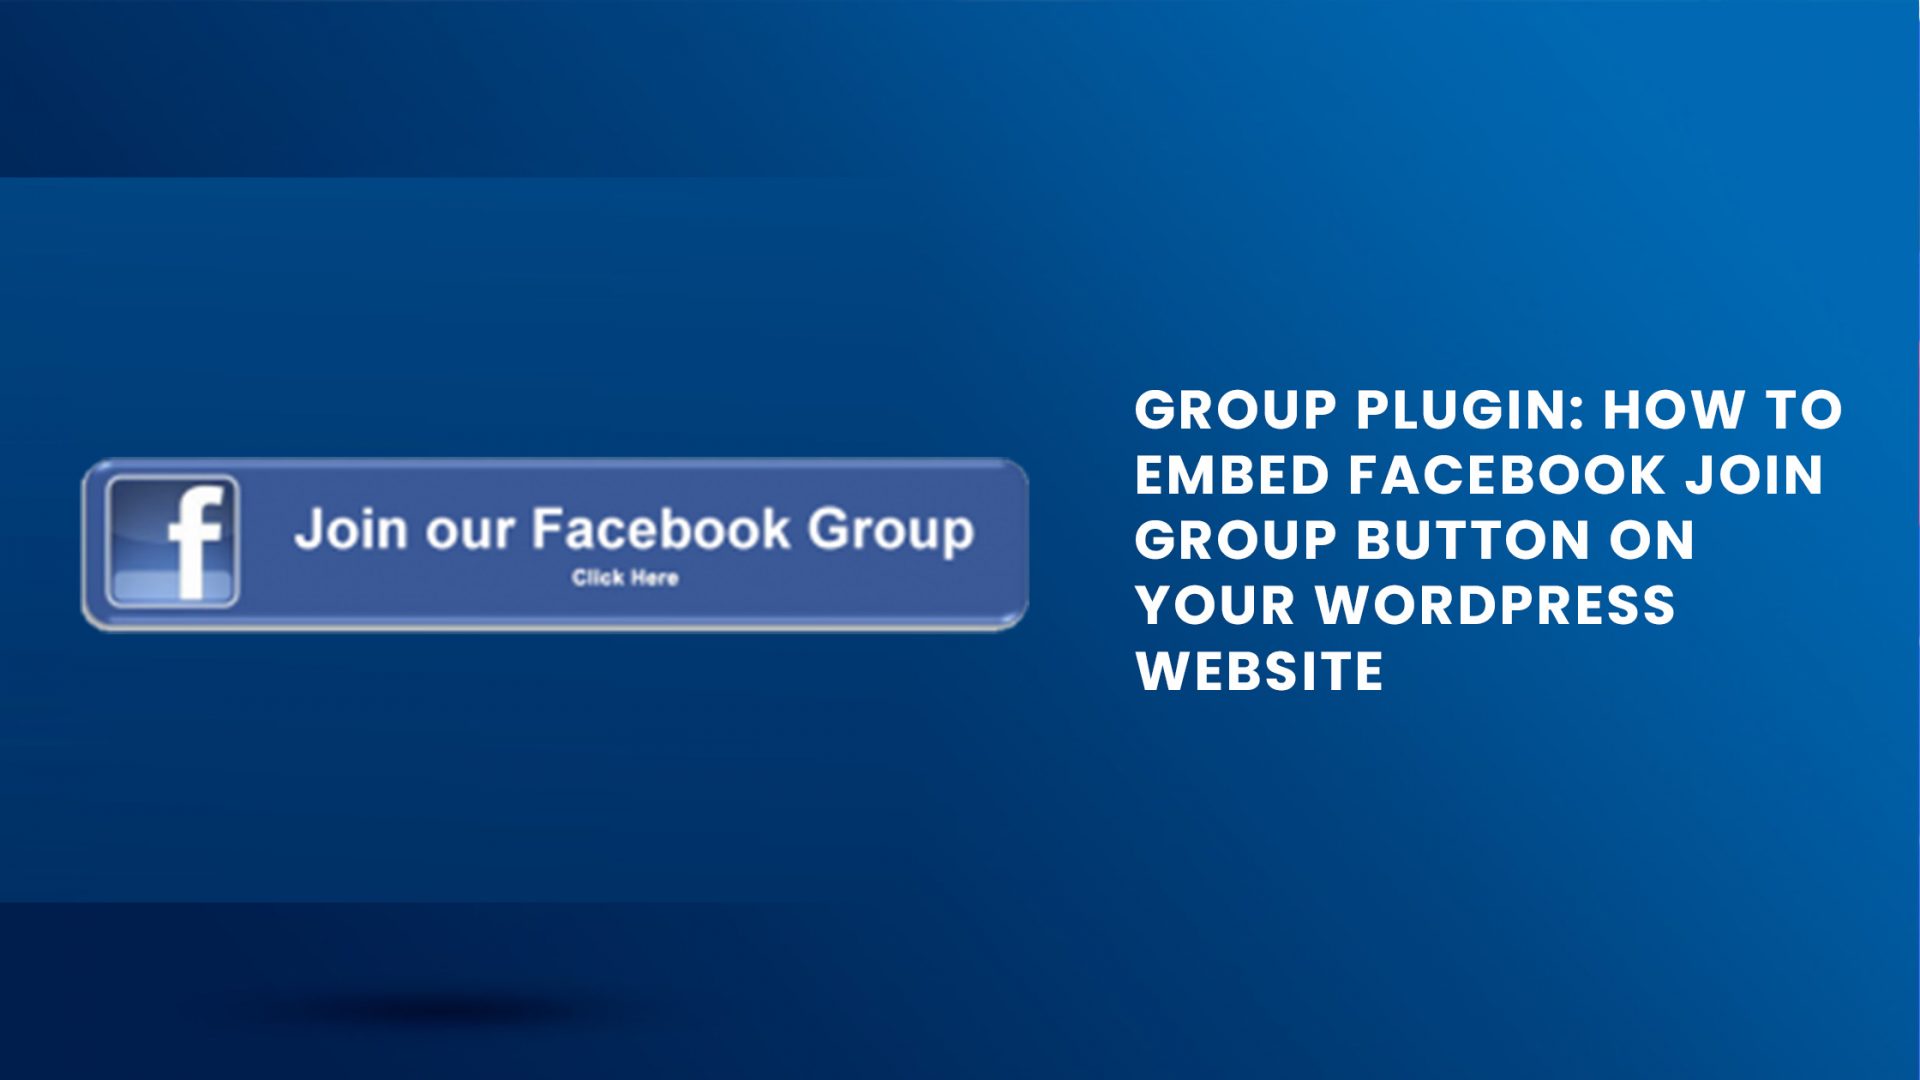 Group Plugin: How To Embed Facebook Join Group Button On Your WordPress Website